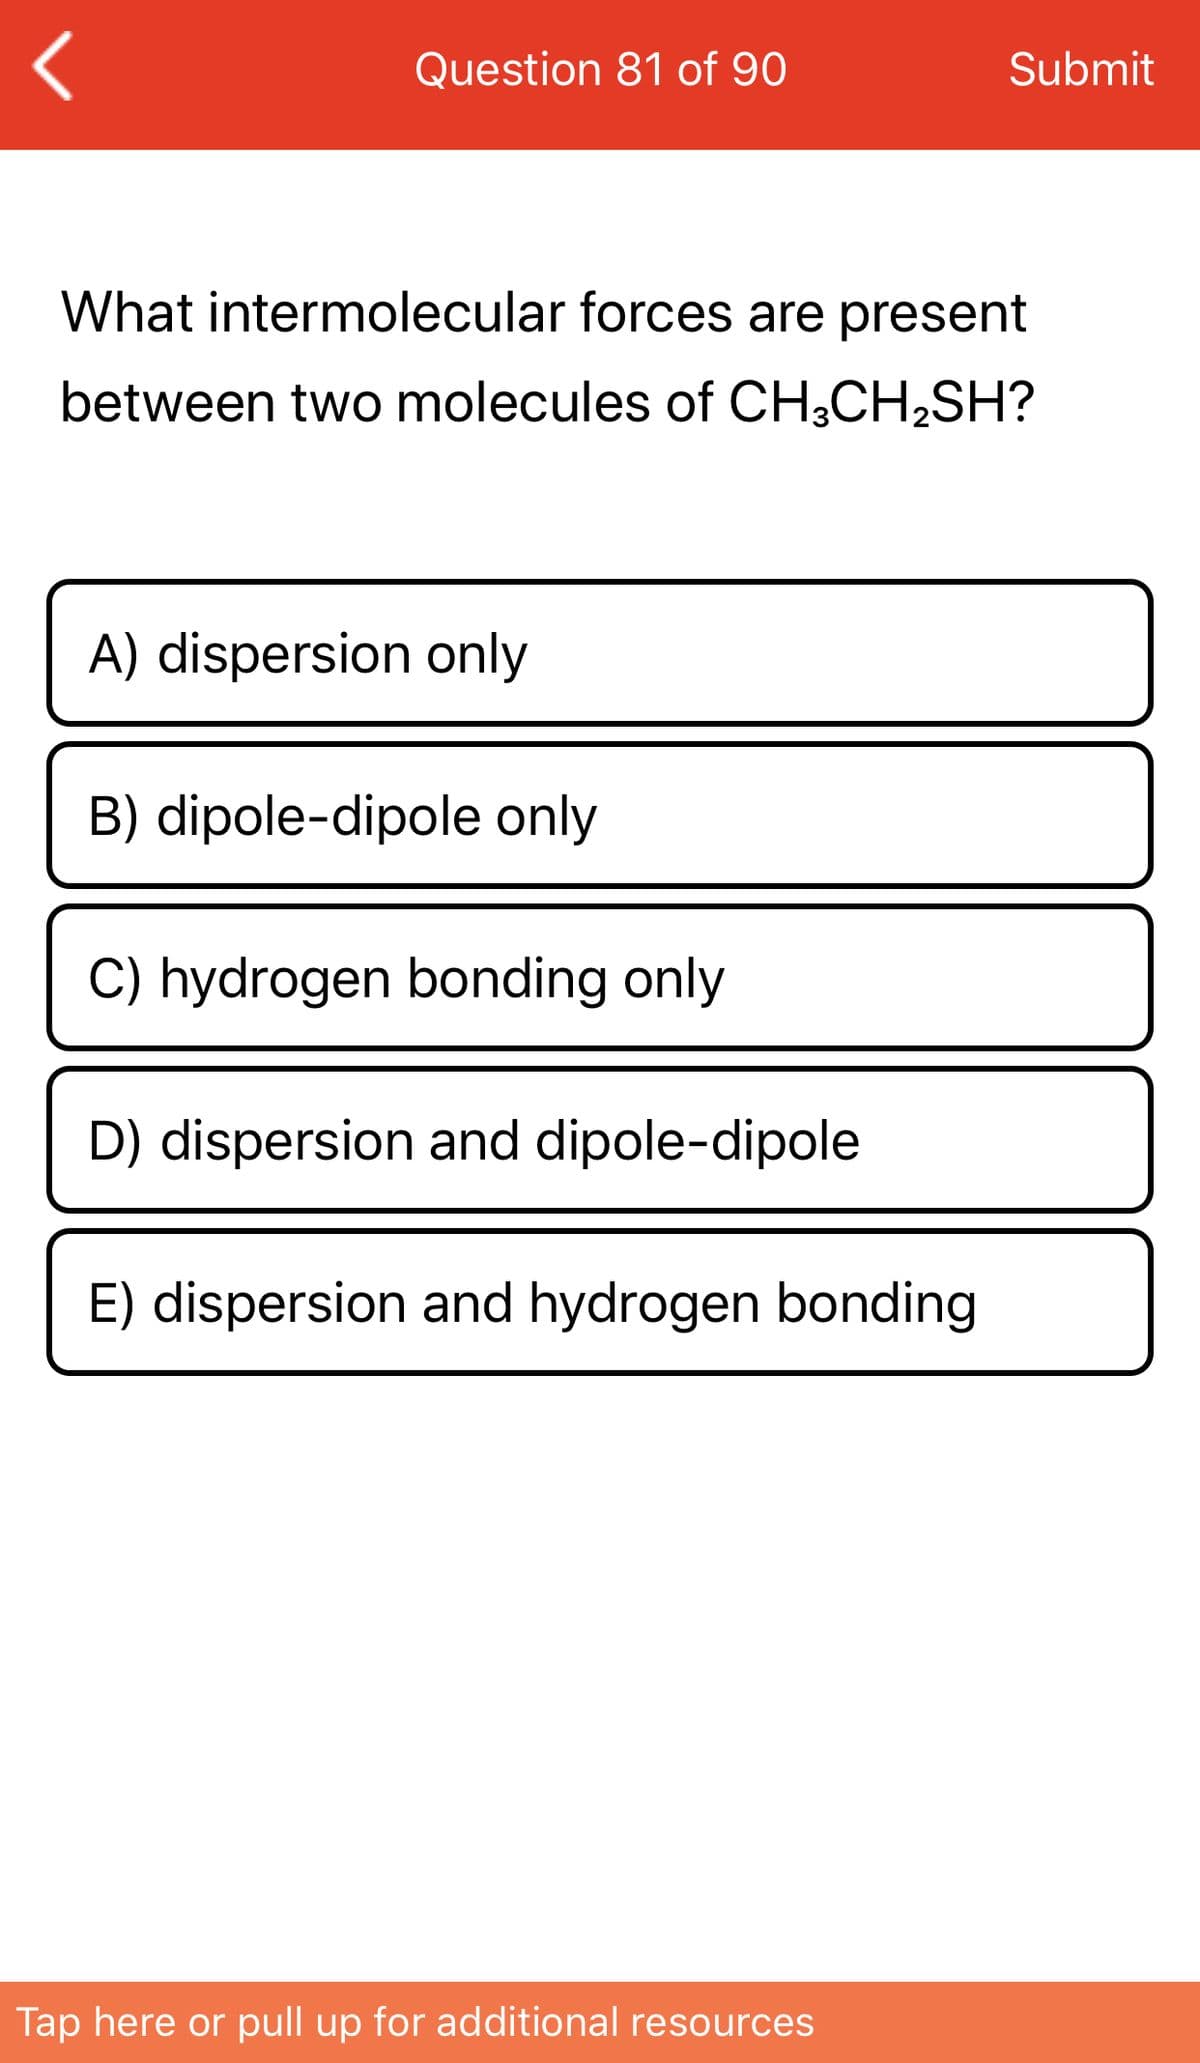 Question 81 of 90
Submit
What intermolecular forces are present
between two molecules of CH;CH,SH?
A) dispersion only
B) dipole-dipole only
C) hydrogen bonding only
D) dispersion and dipole-dipole
E) dispersion and hydrogen bonding
Tap here or pull up for additional resources
